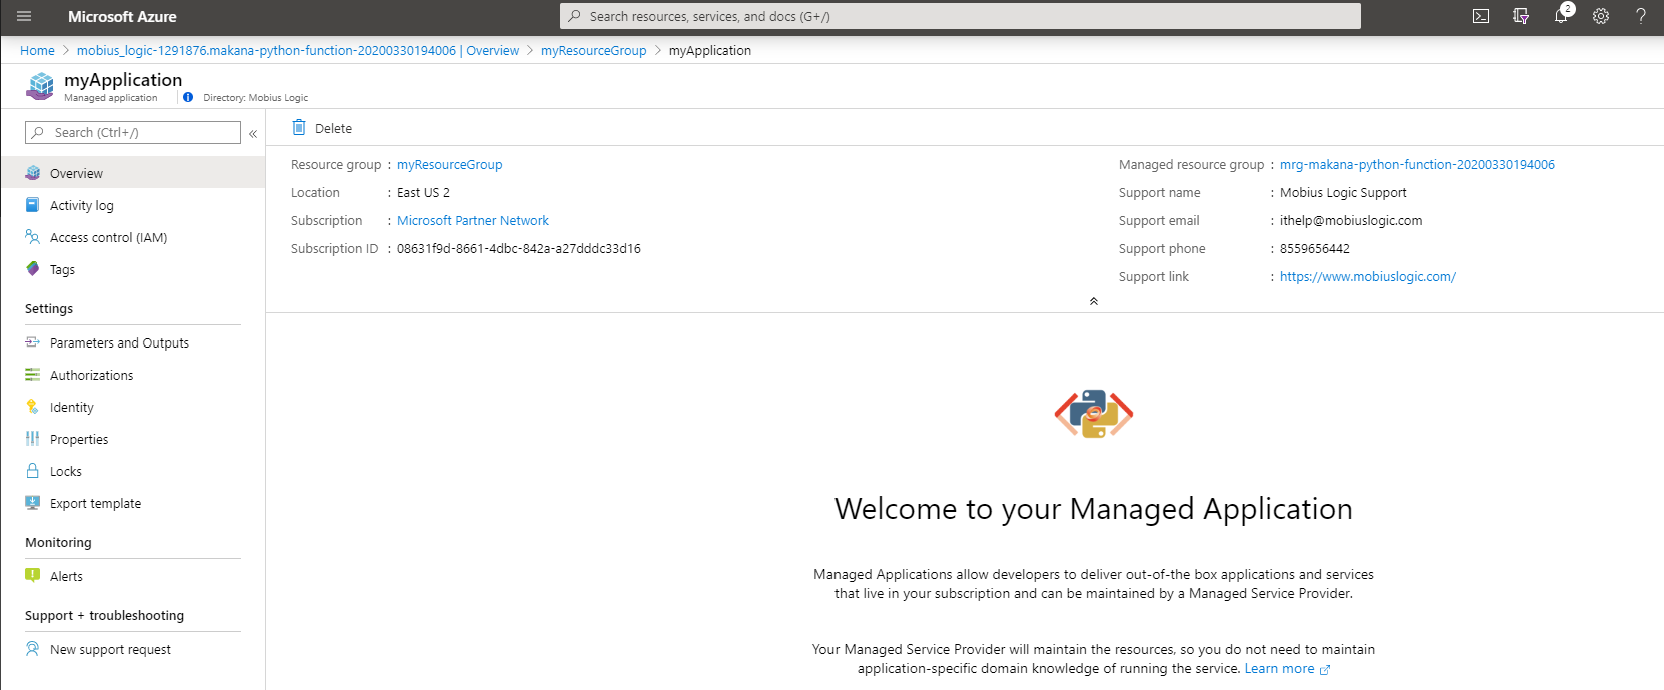 Welcome to your managed application